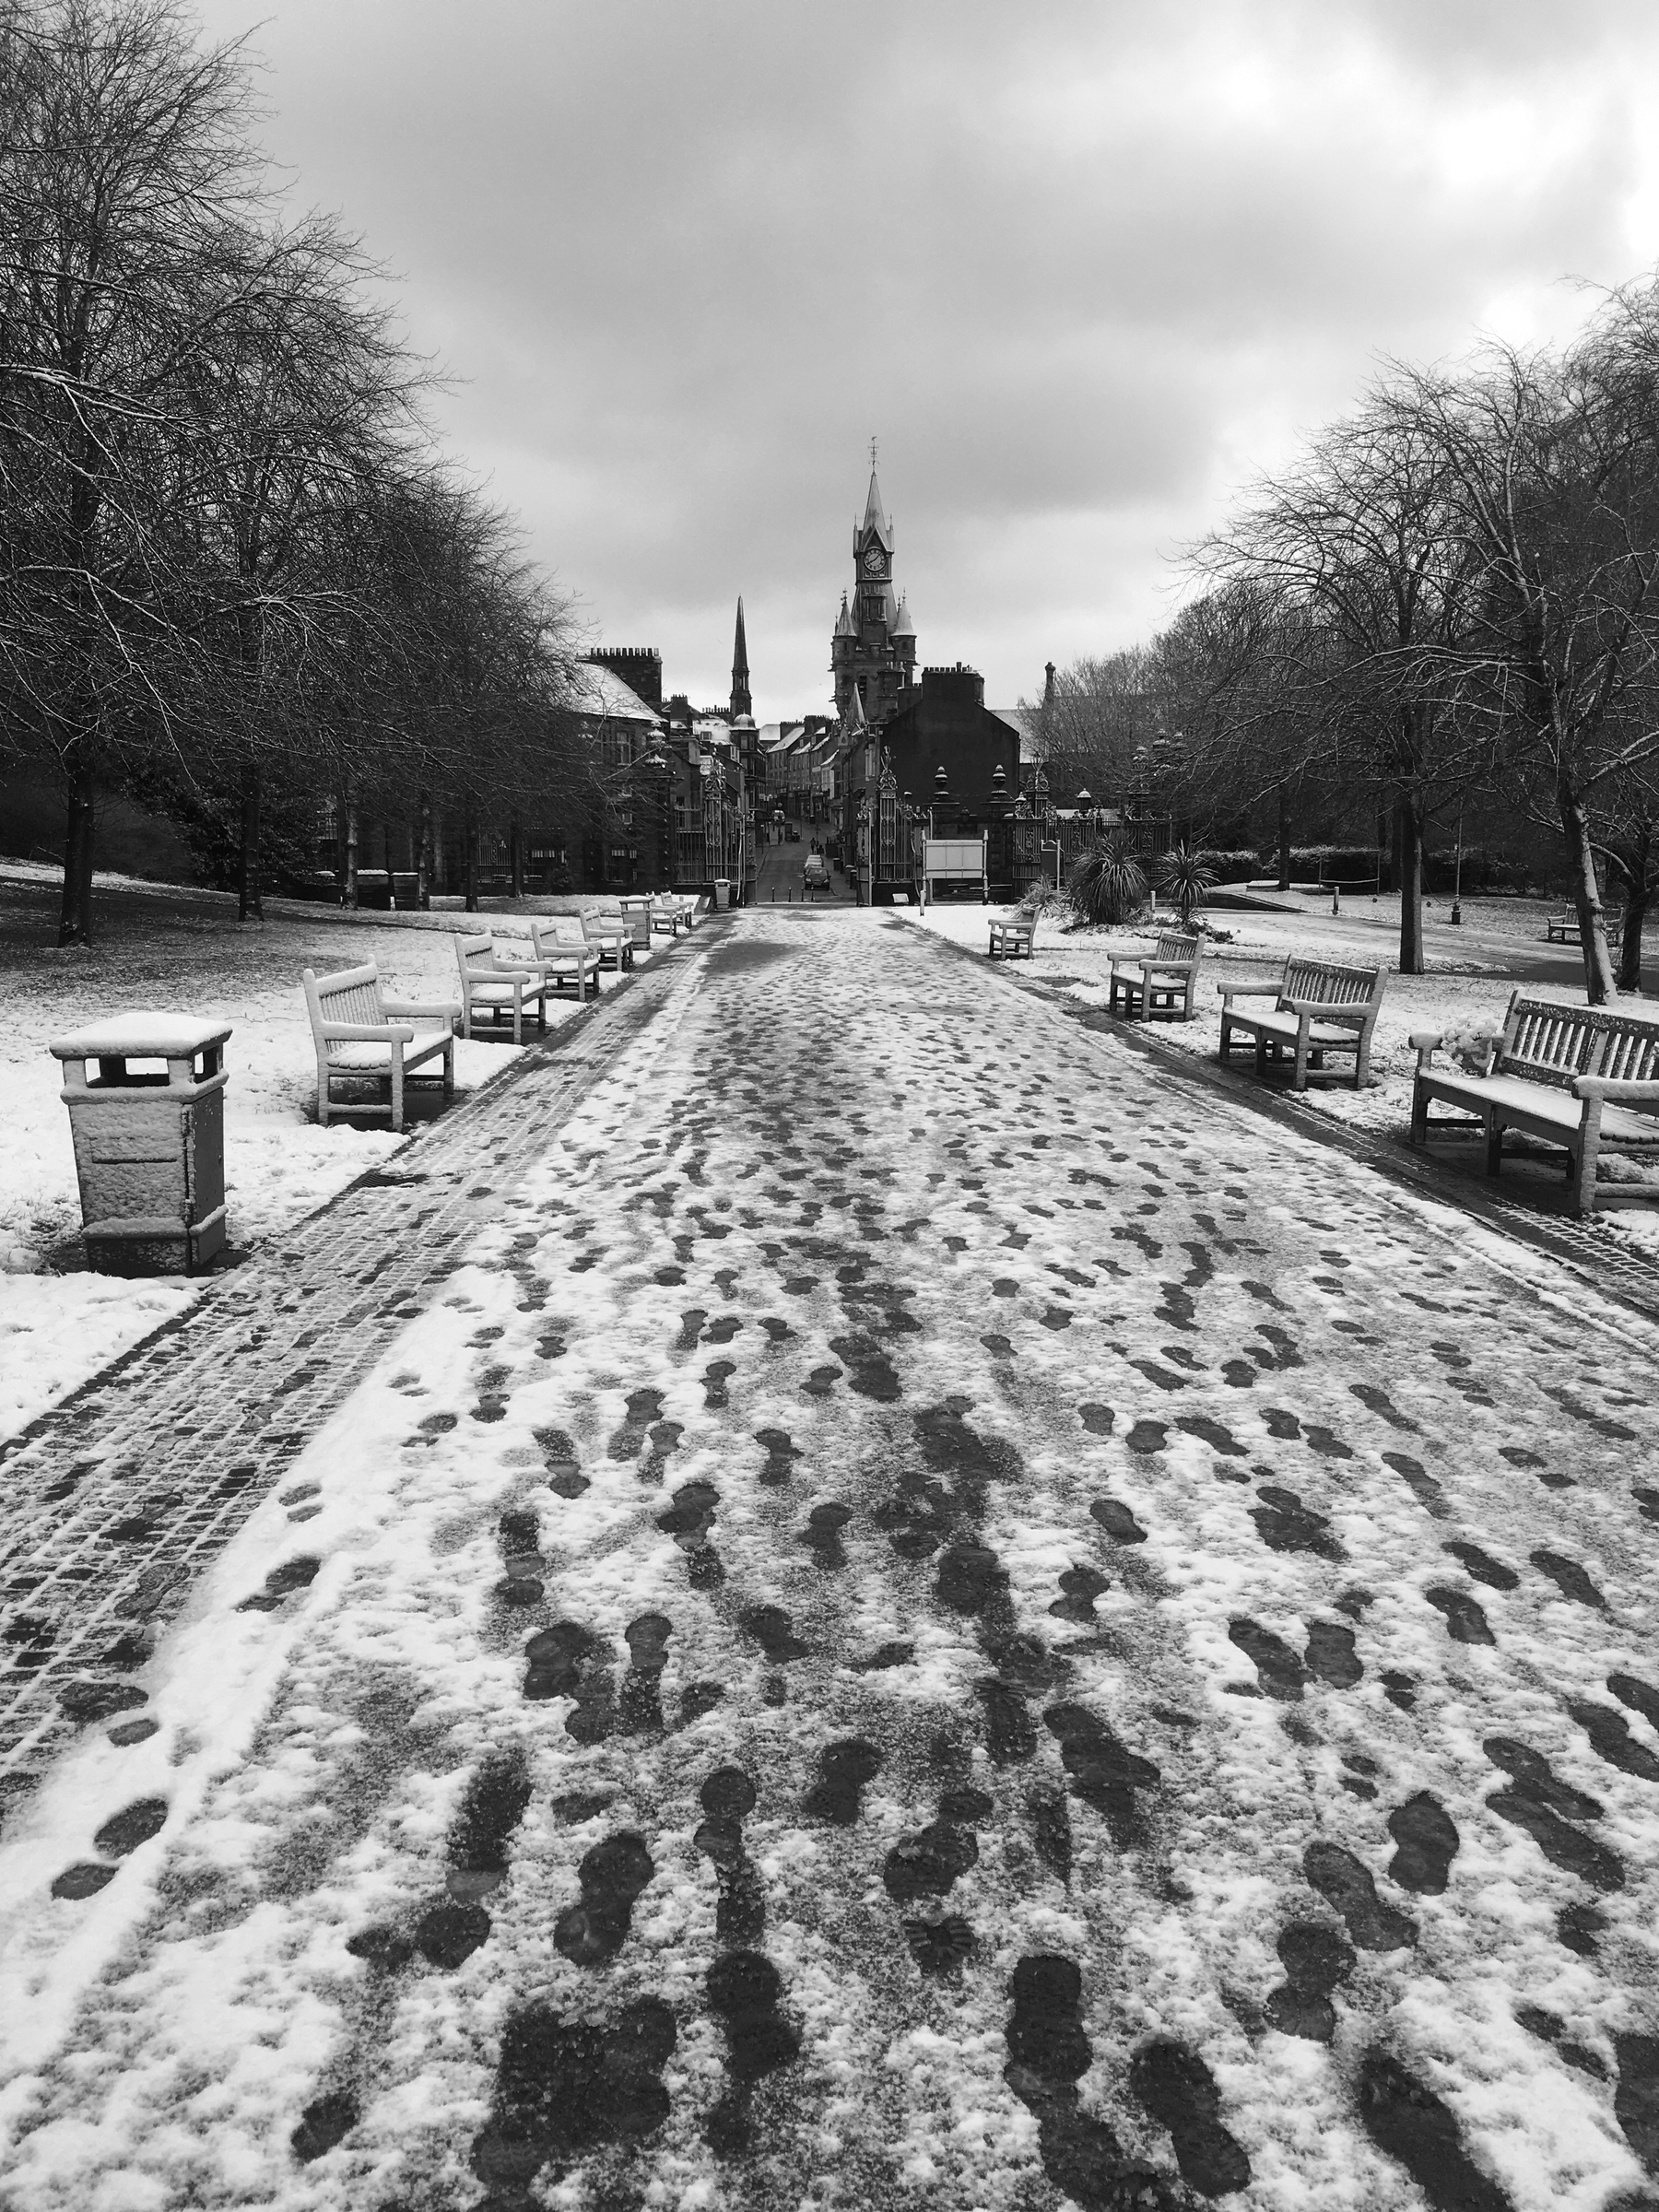 Snowy path in the park with footprints